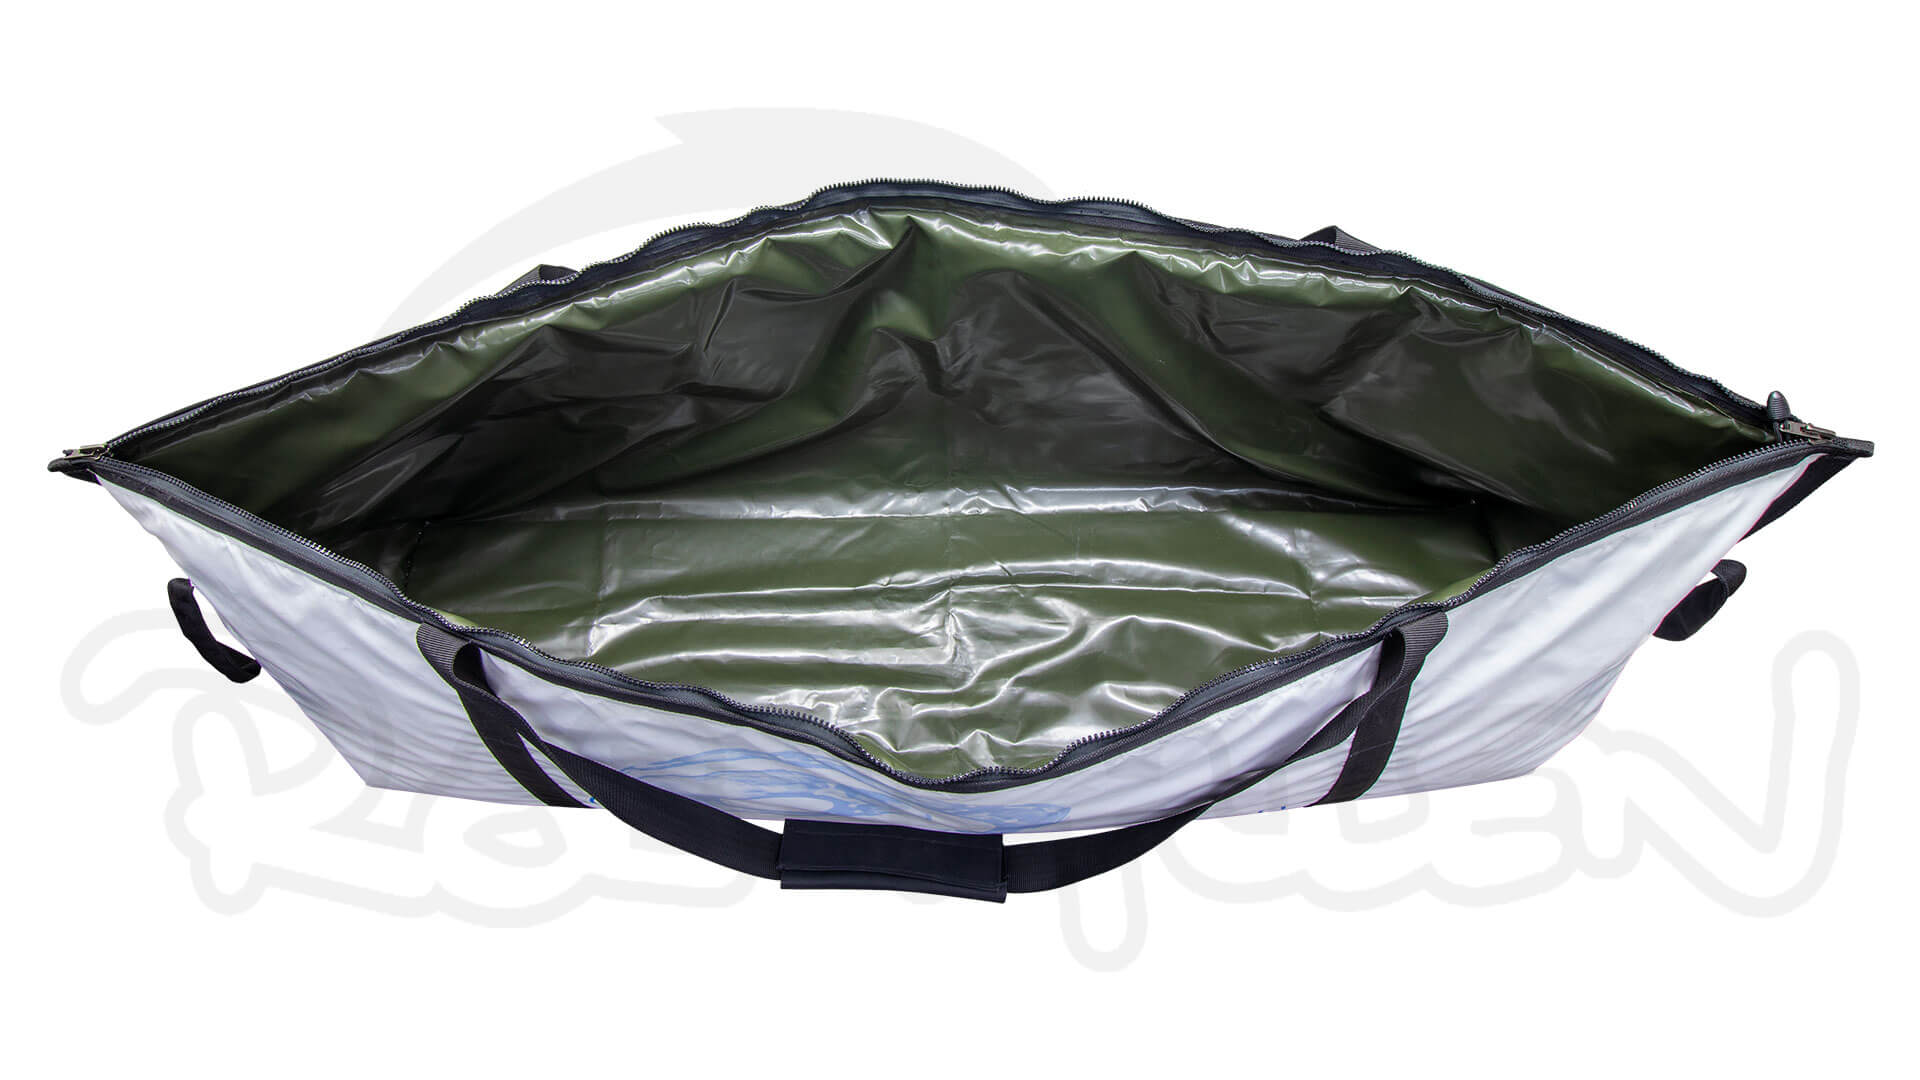 https://www.spearfishing.co.uk/wp-content/uploads/2021/11/rob-allen-insulated-fish-bag-open-top-1.jpg